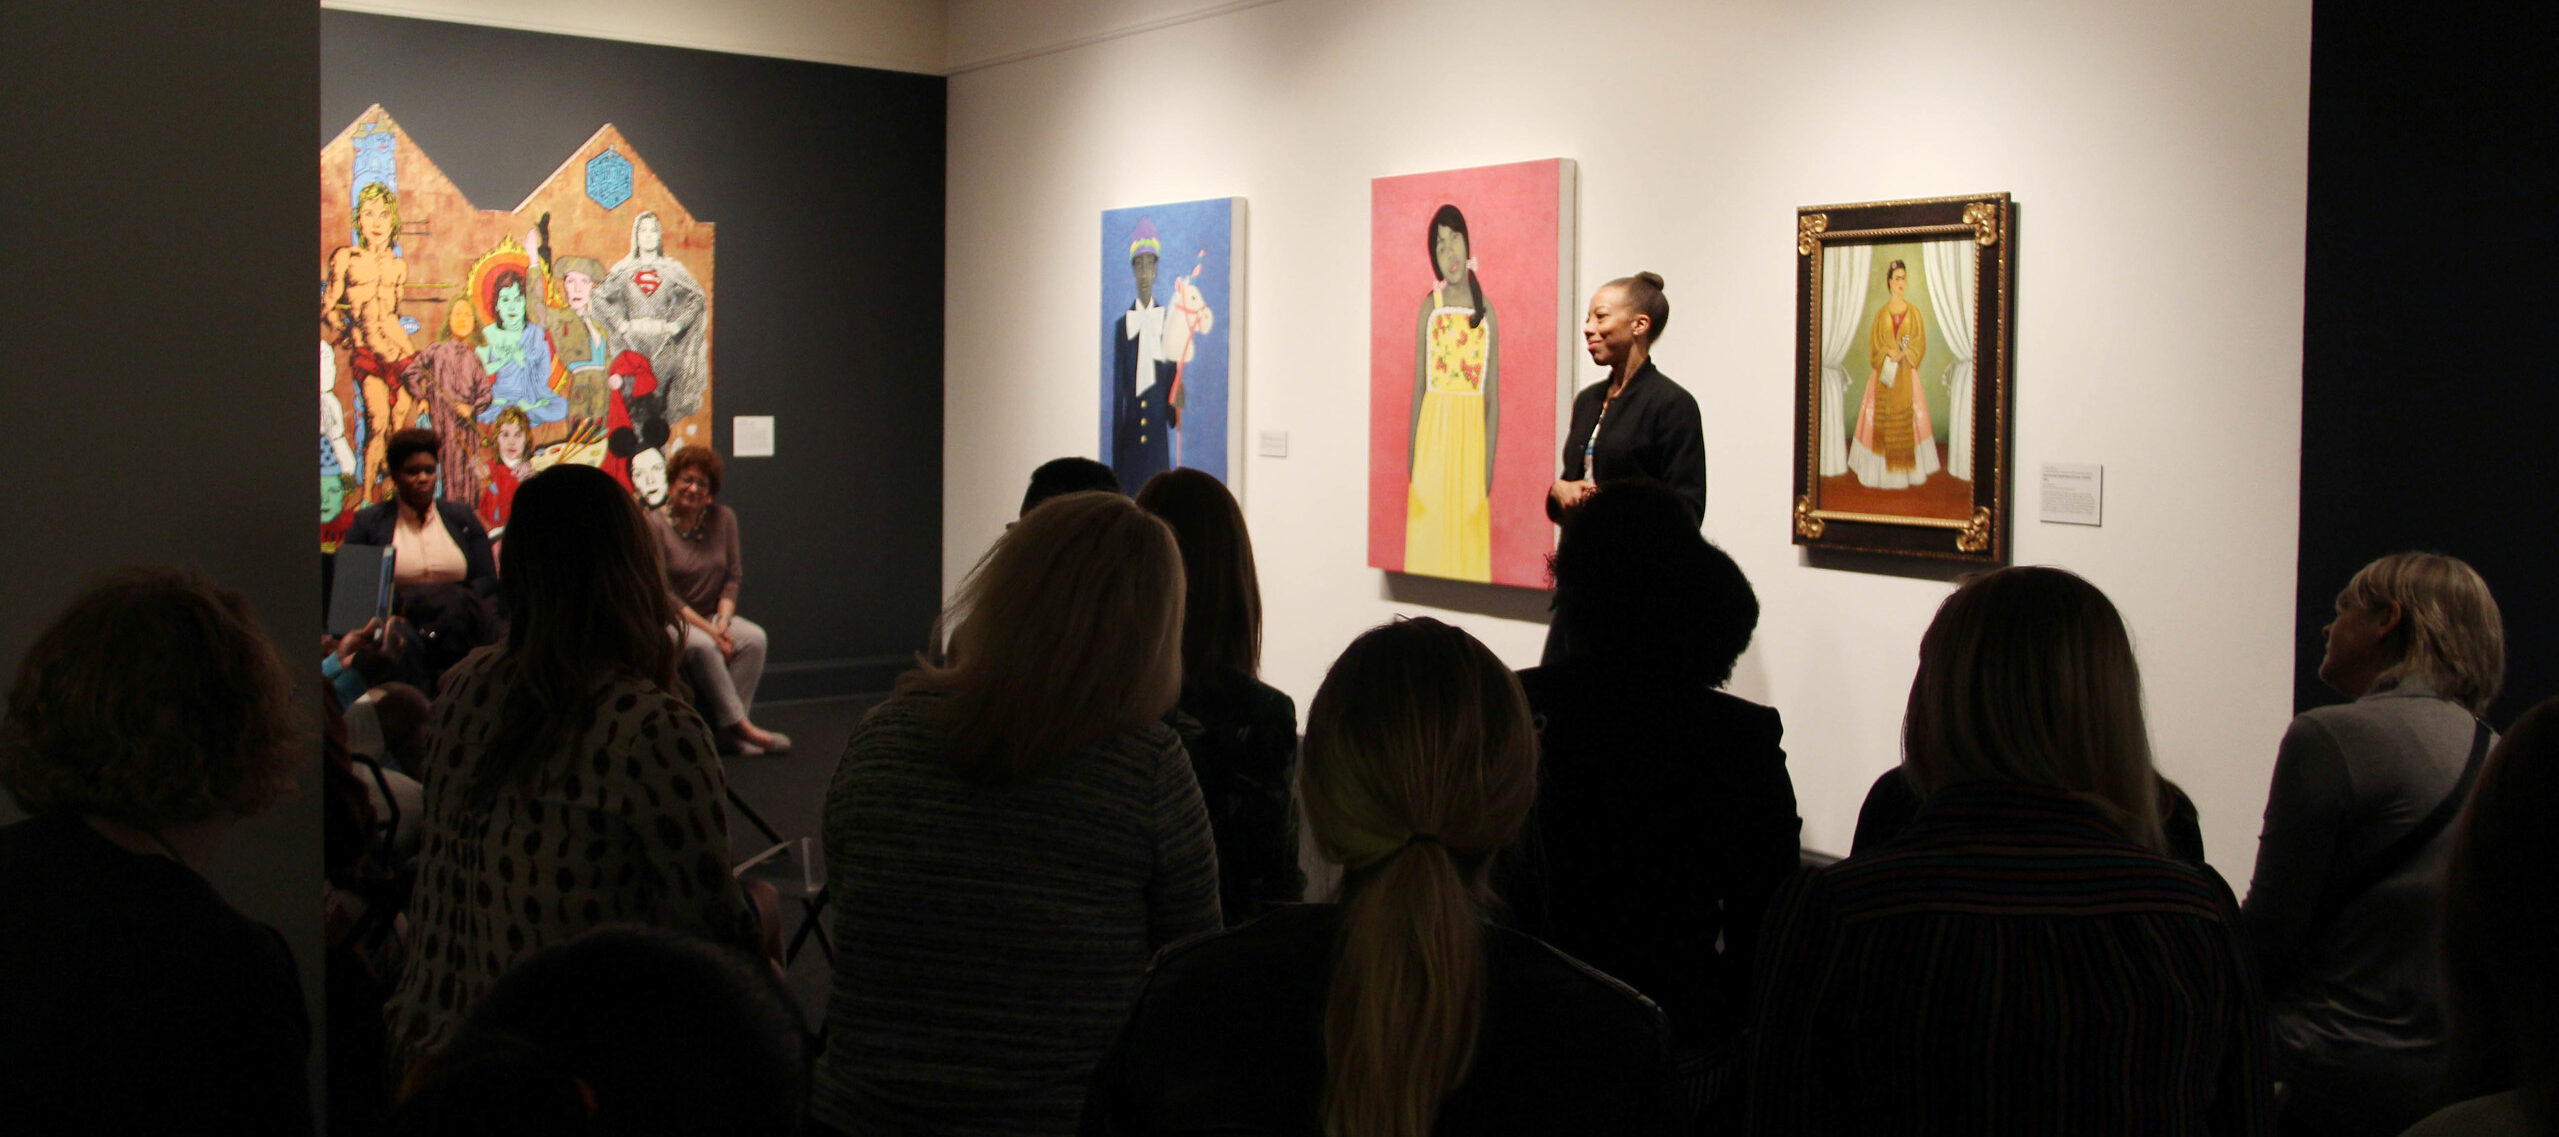 In a museum gallery, an artist with medium skin tone discusses her works to an audience.